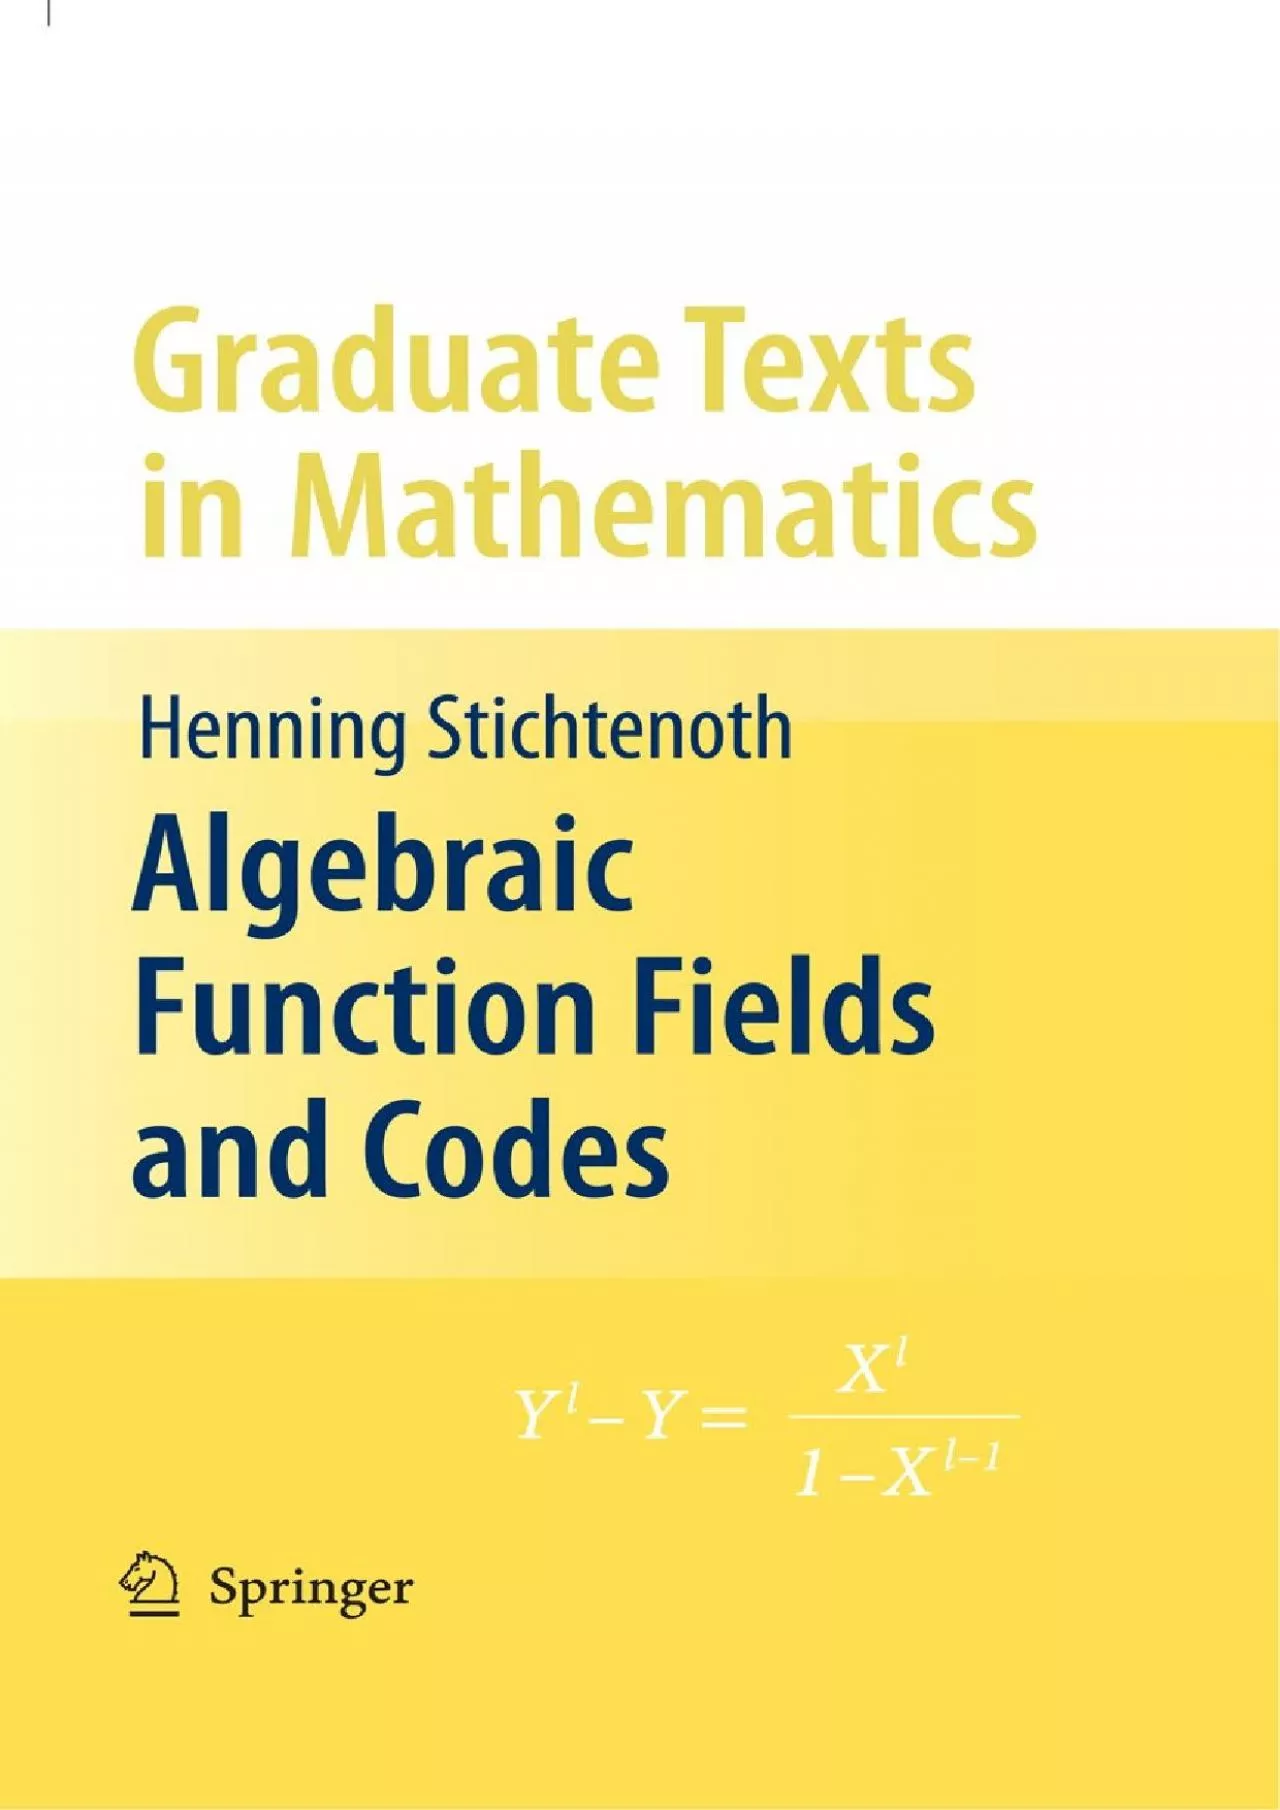 (DOWNLOAD)-Algebraic Function Fields and Codes (Graduate Texts in Mathematics Book 254)